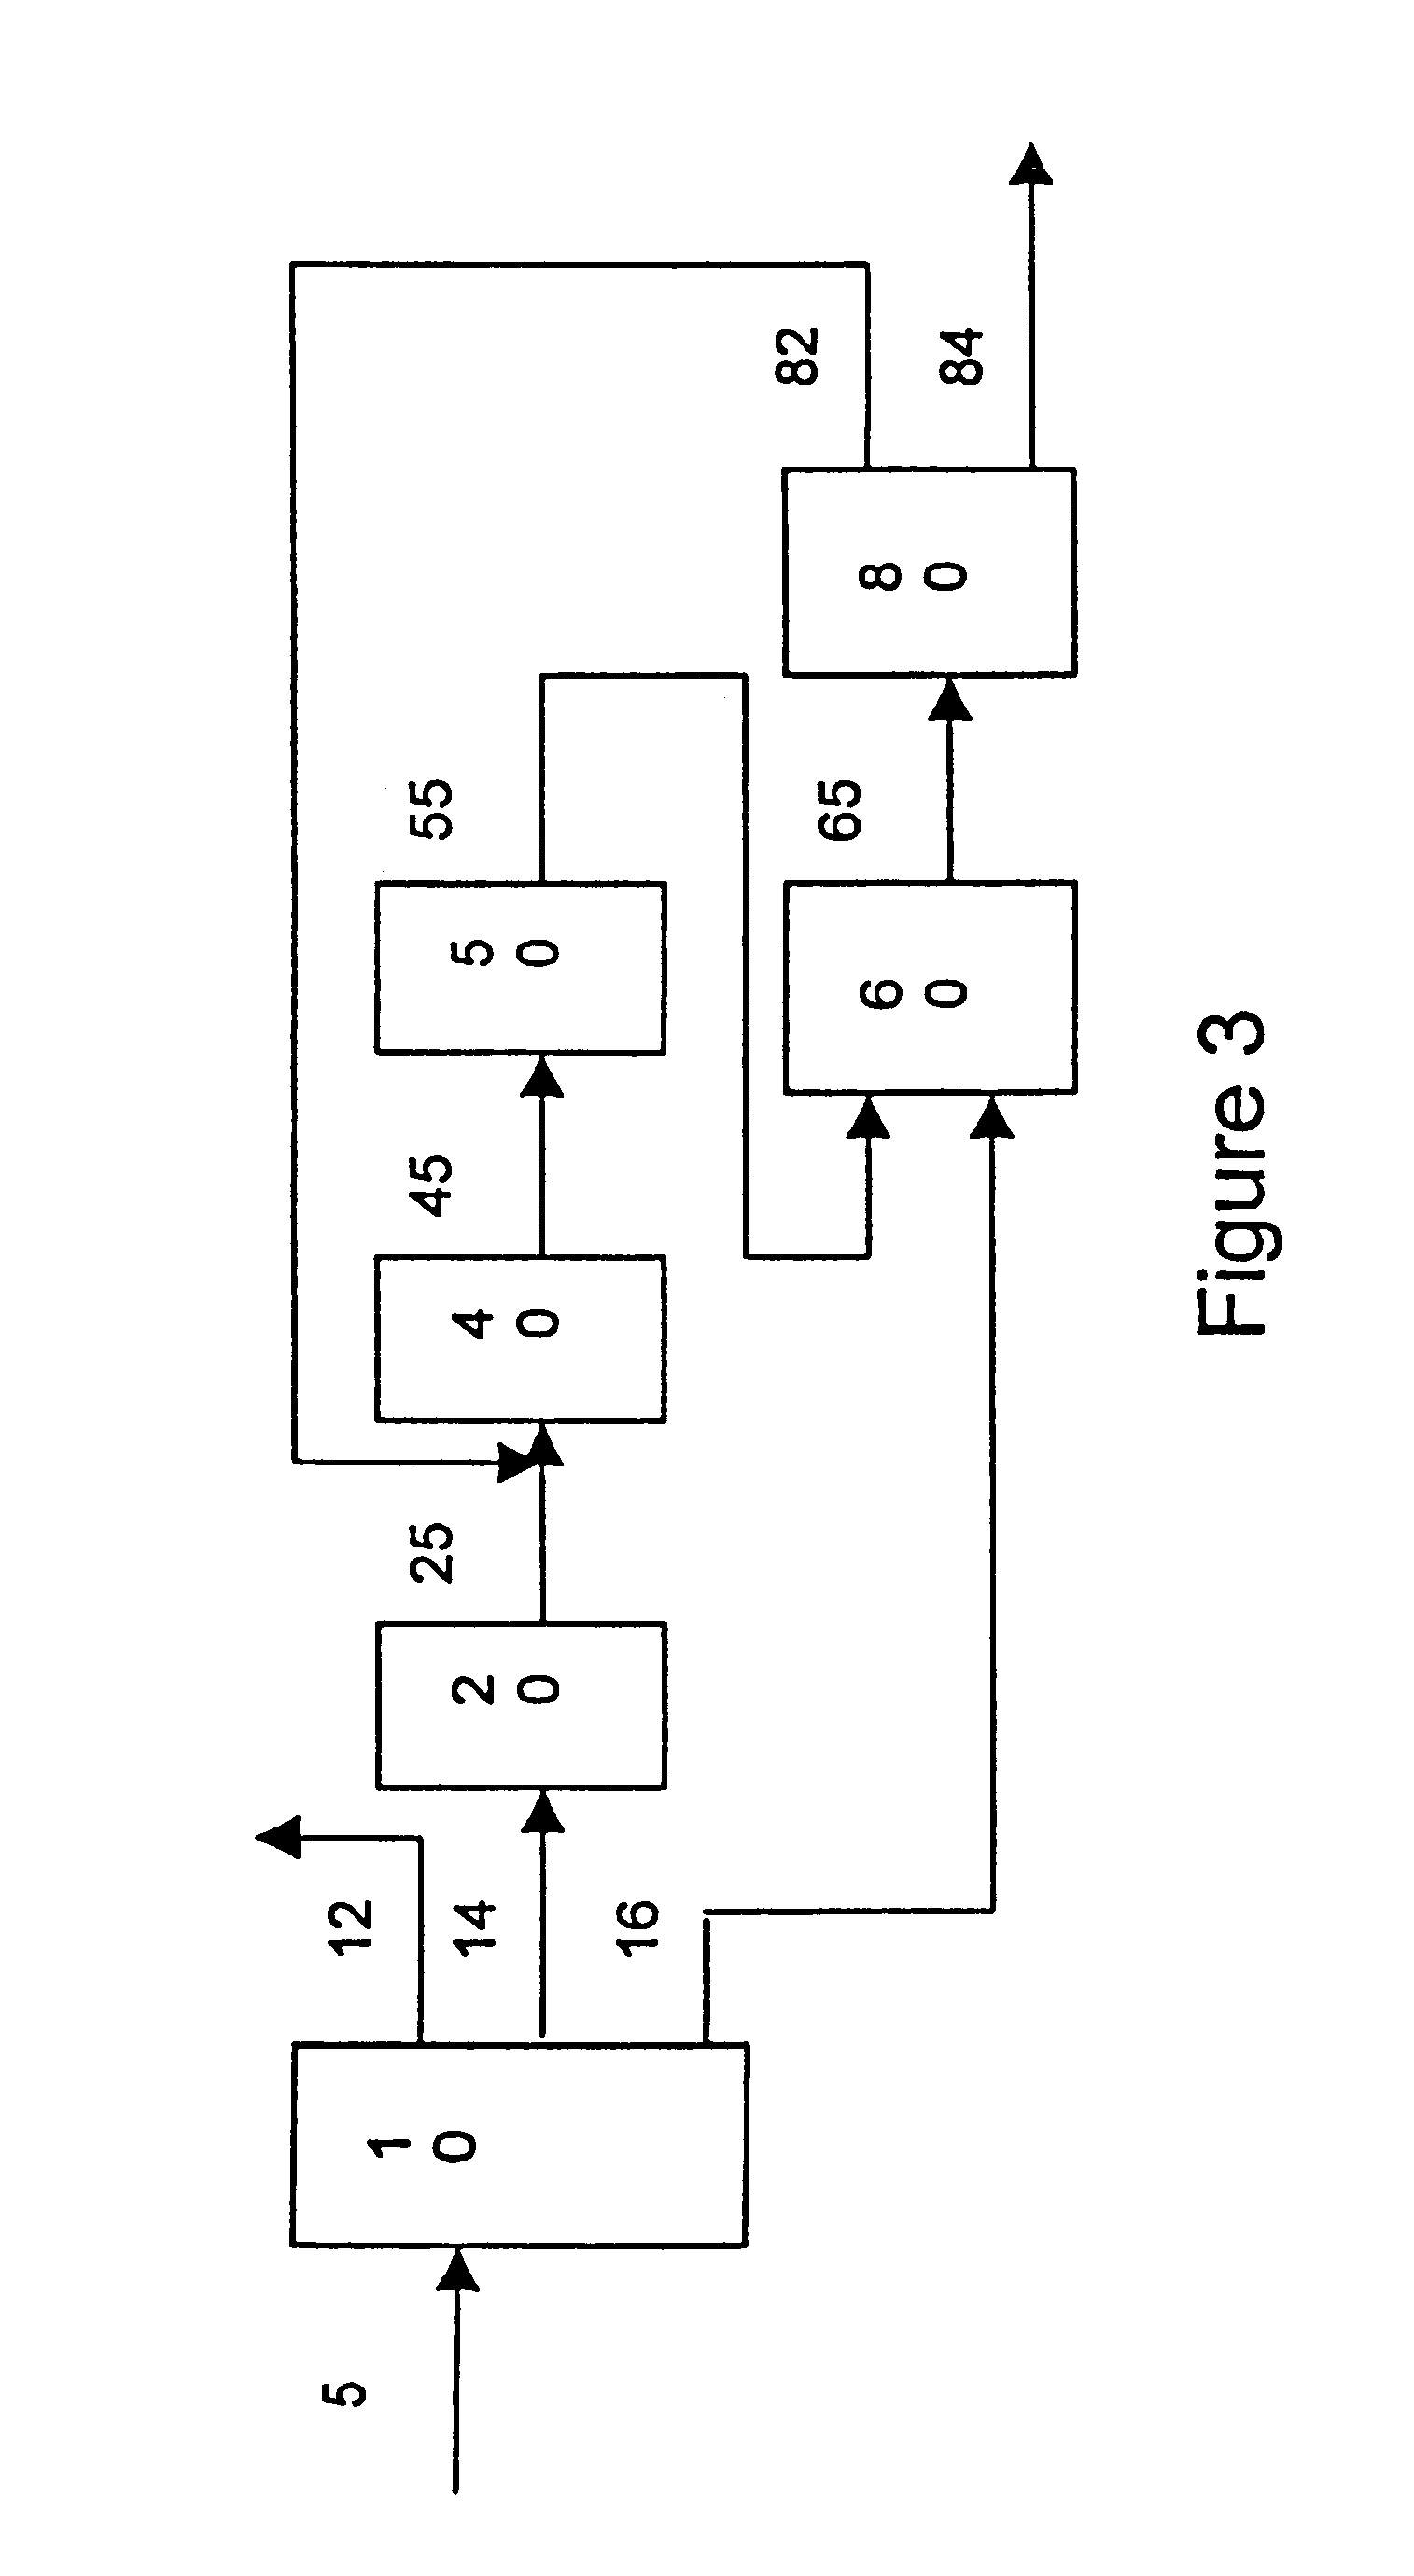 Process for making a lube base stock from a lower molecular weight feedstock